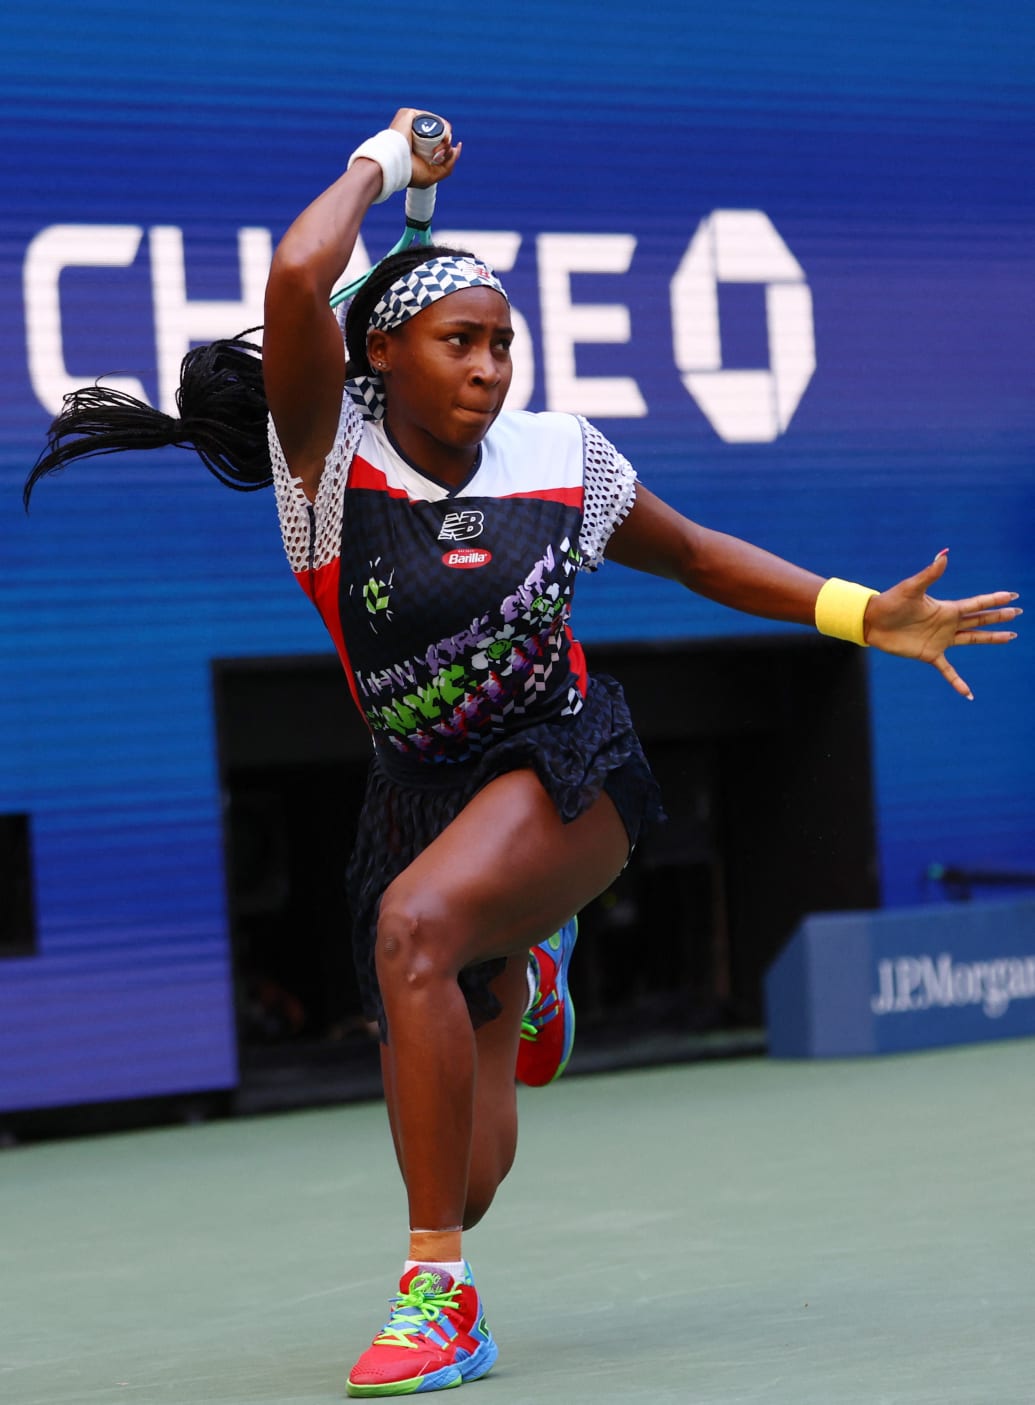 Photograph of Coco Gauff playing in the 2022 US Open.